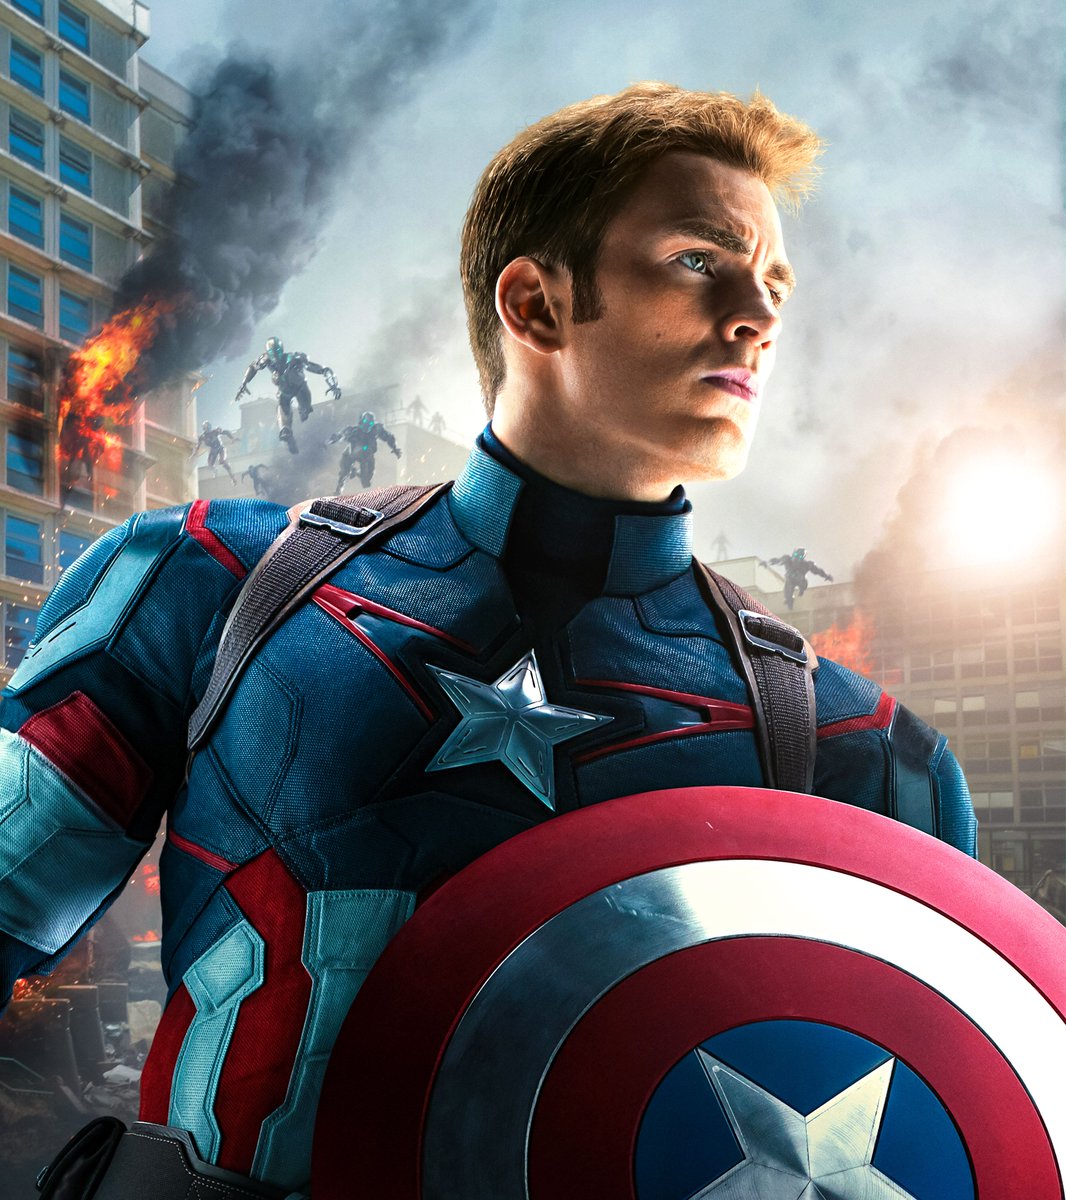 Will Chris Evans ever return as #CaptainAmerica? Here's everything we know about his potential #Marvel return: thedirect.com/article/chris-…